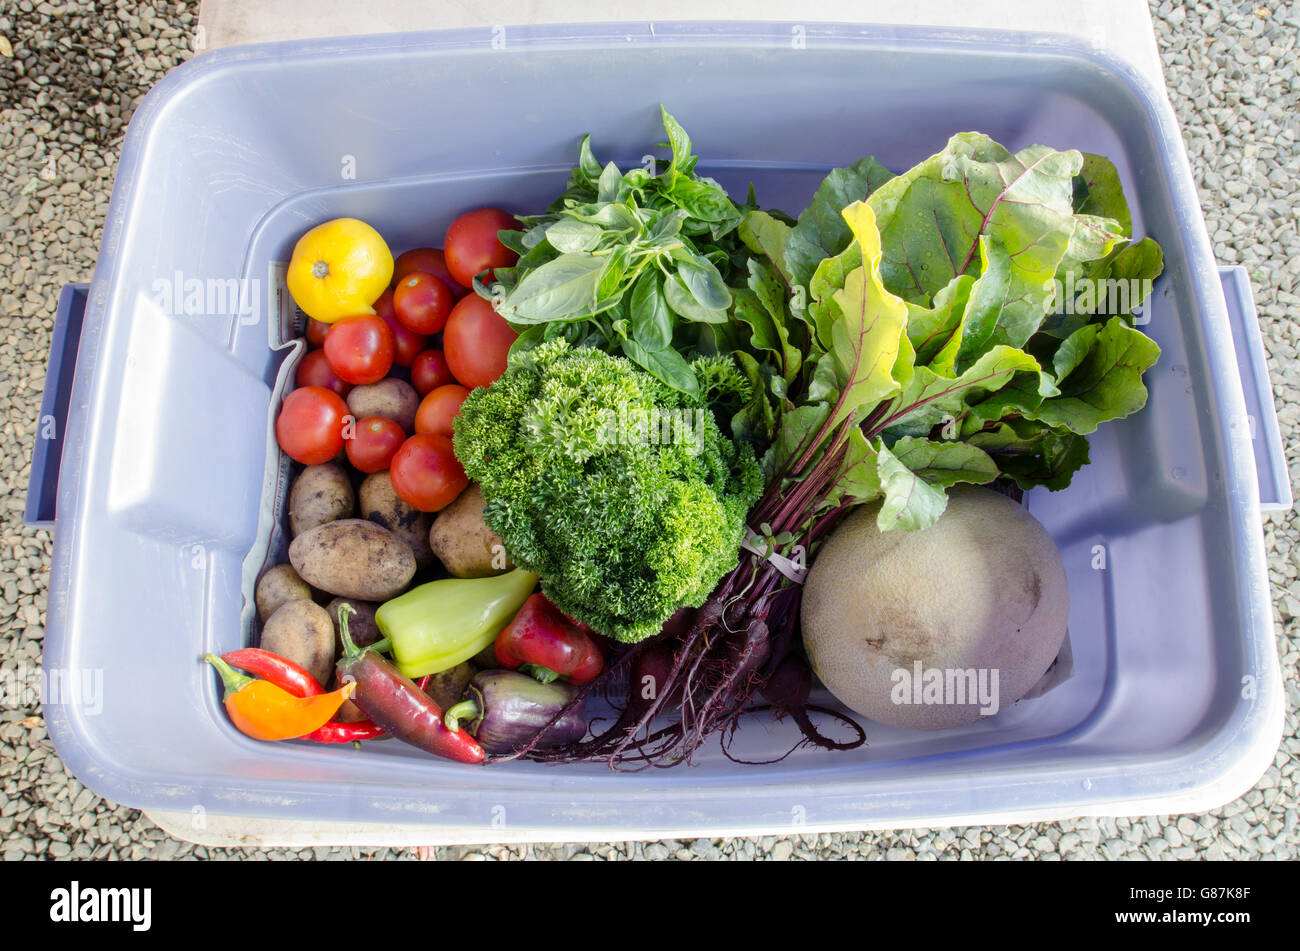 Plastic bin with freshly harvested produce. This is a weekly CSA (Community Supported Agriculture) share from a farm in Oregon. Stock Photo